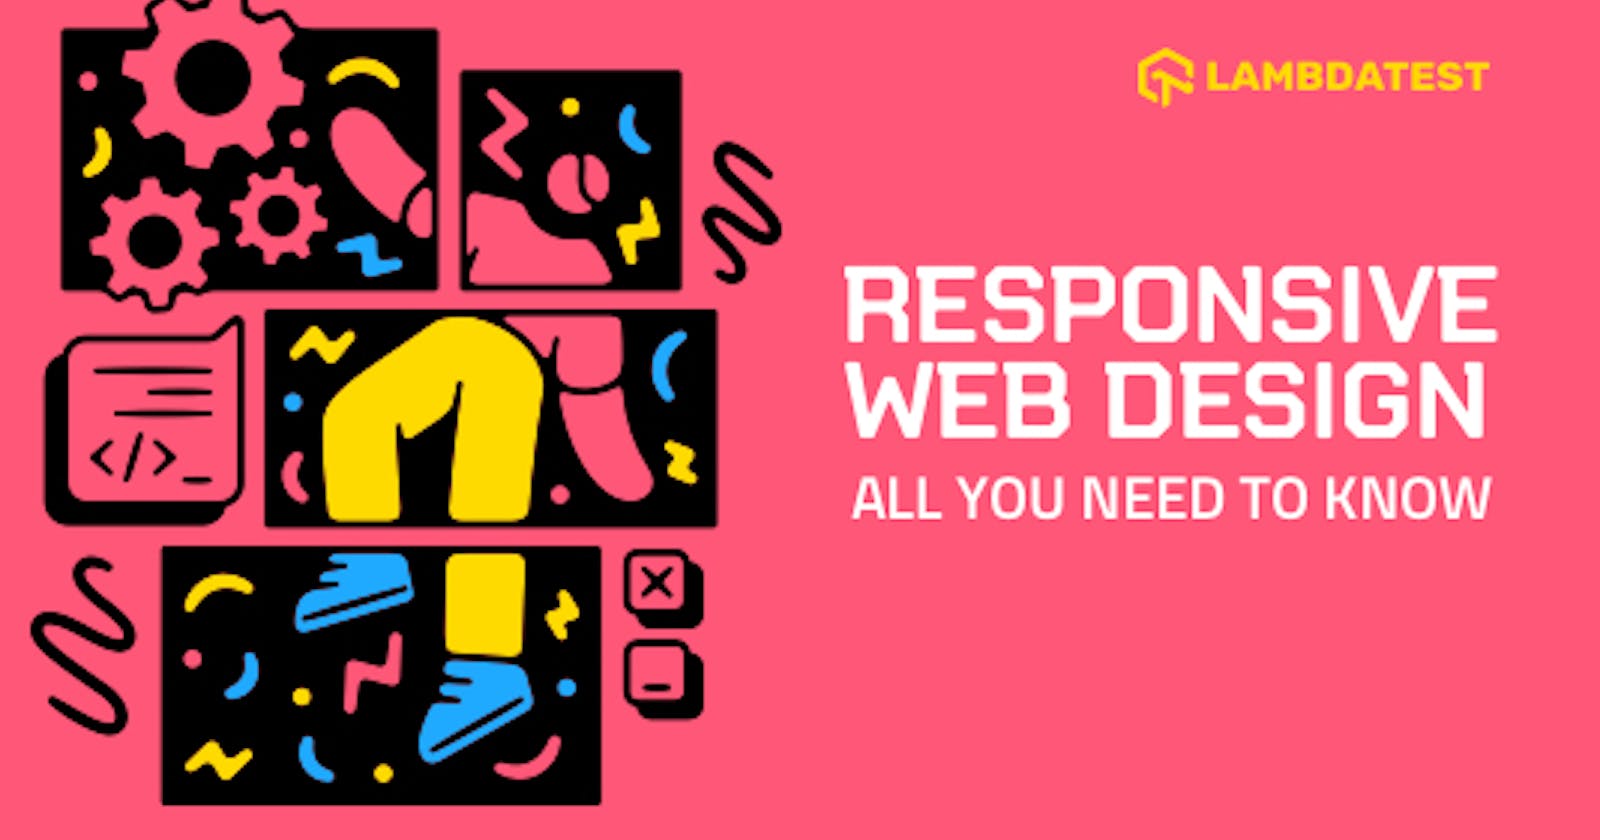 Responsive Web Design: All You Need To Know